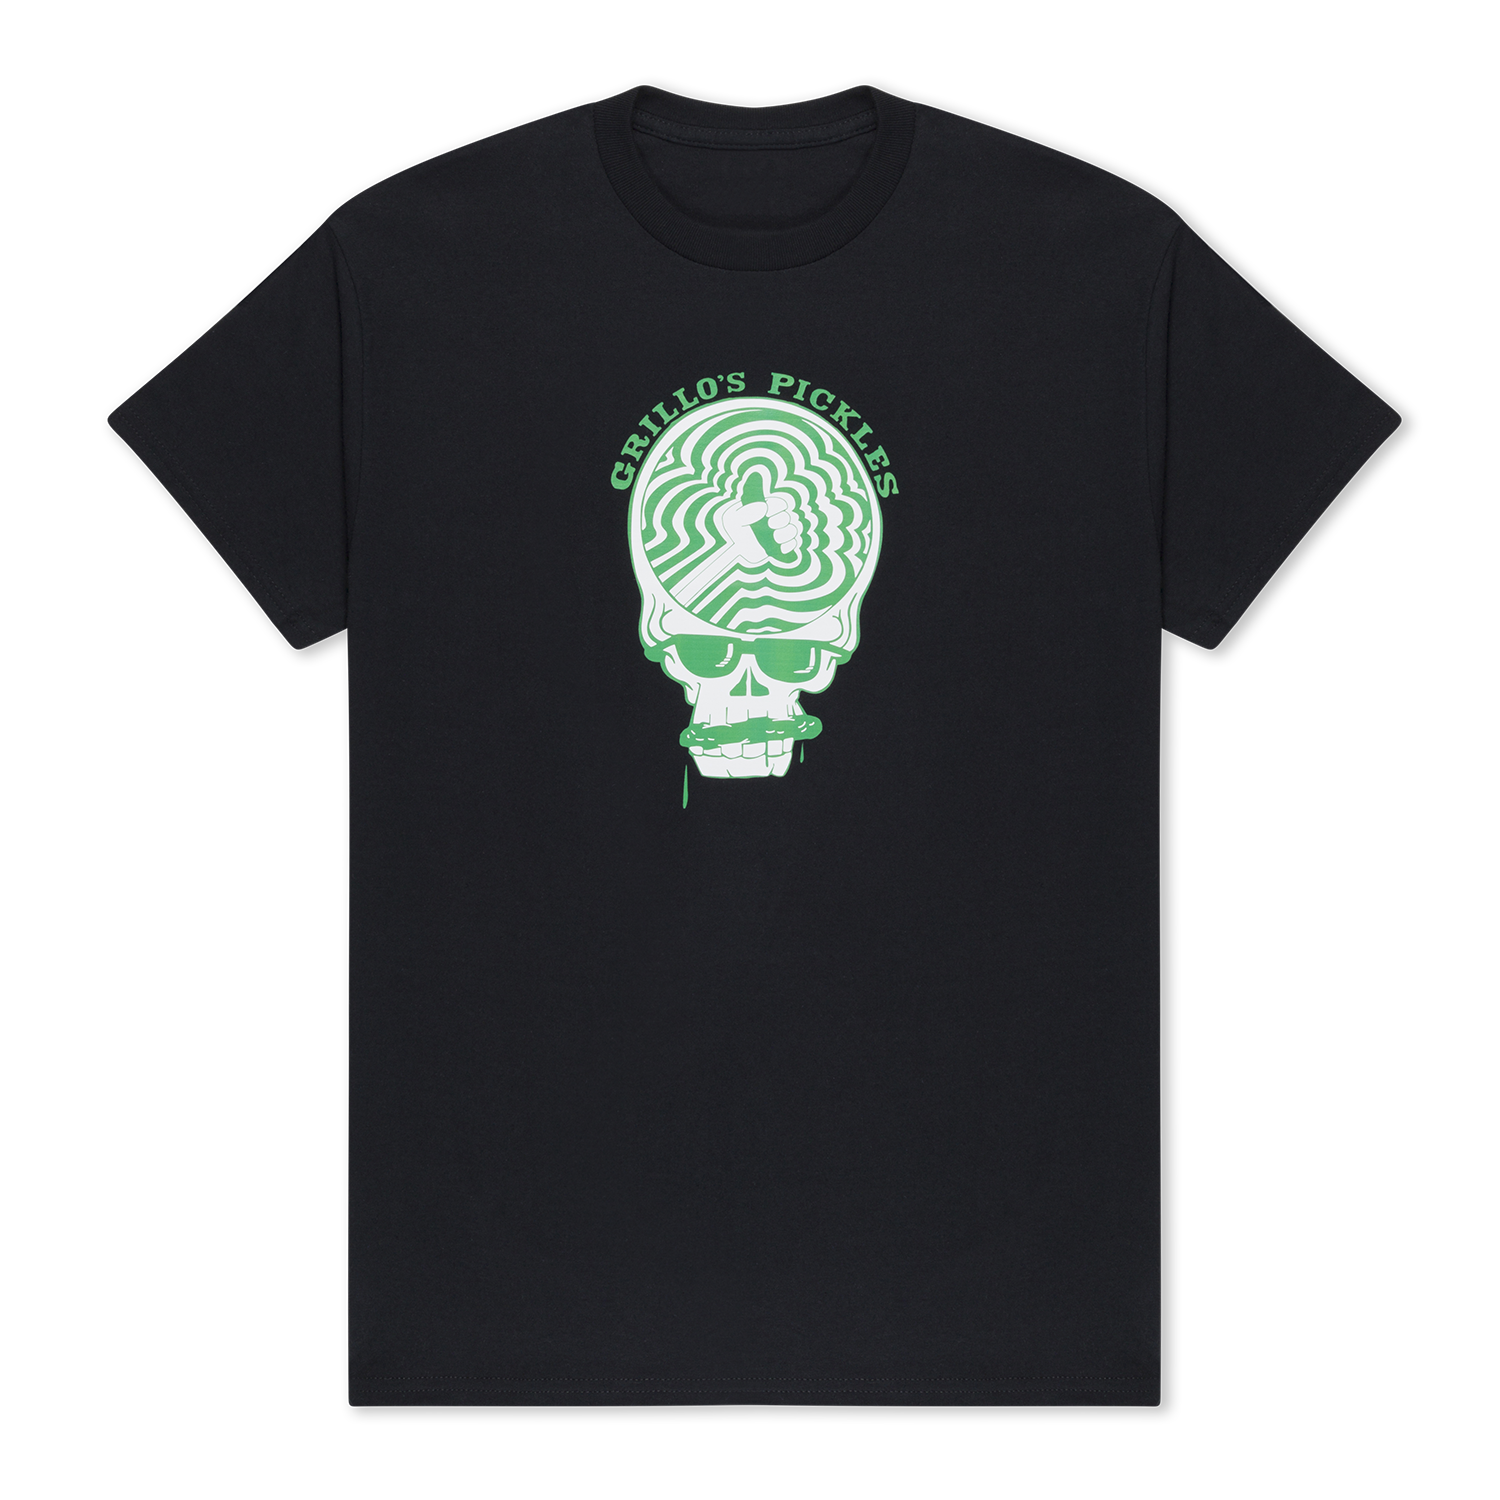 YOUTH NZ x Grillo's Steal Your Pickle Short Sleeve - Black